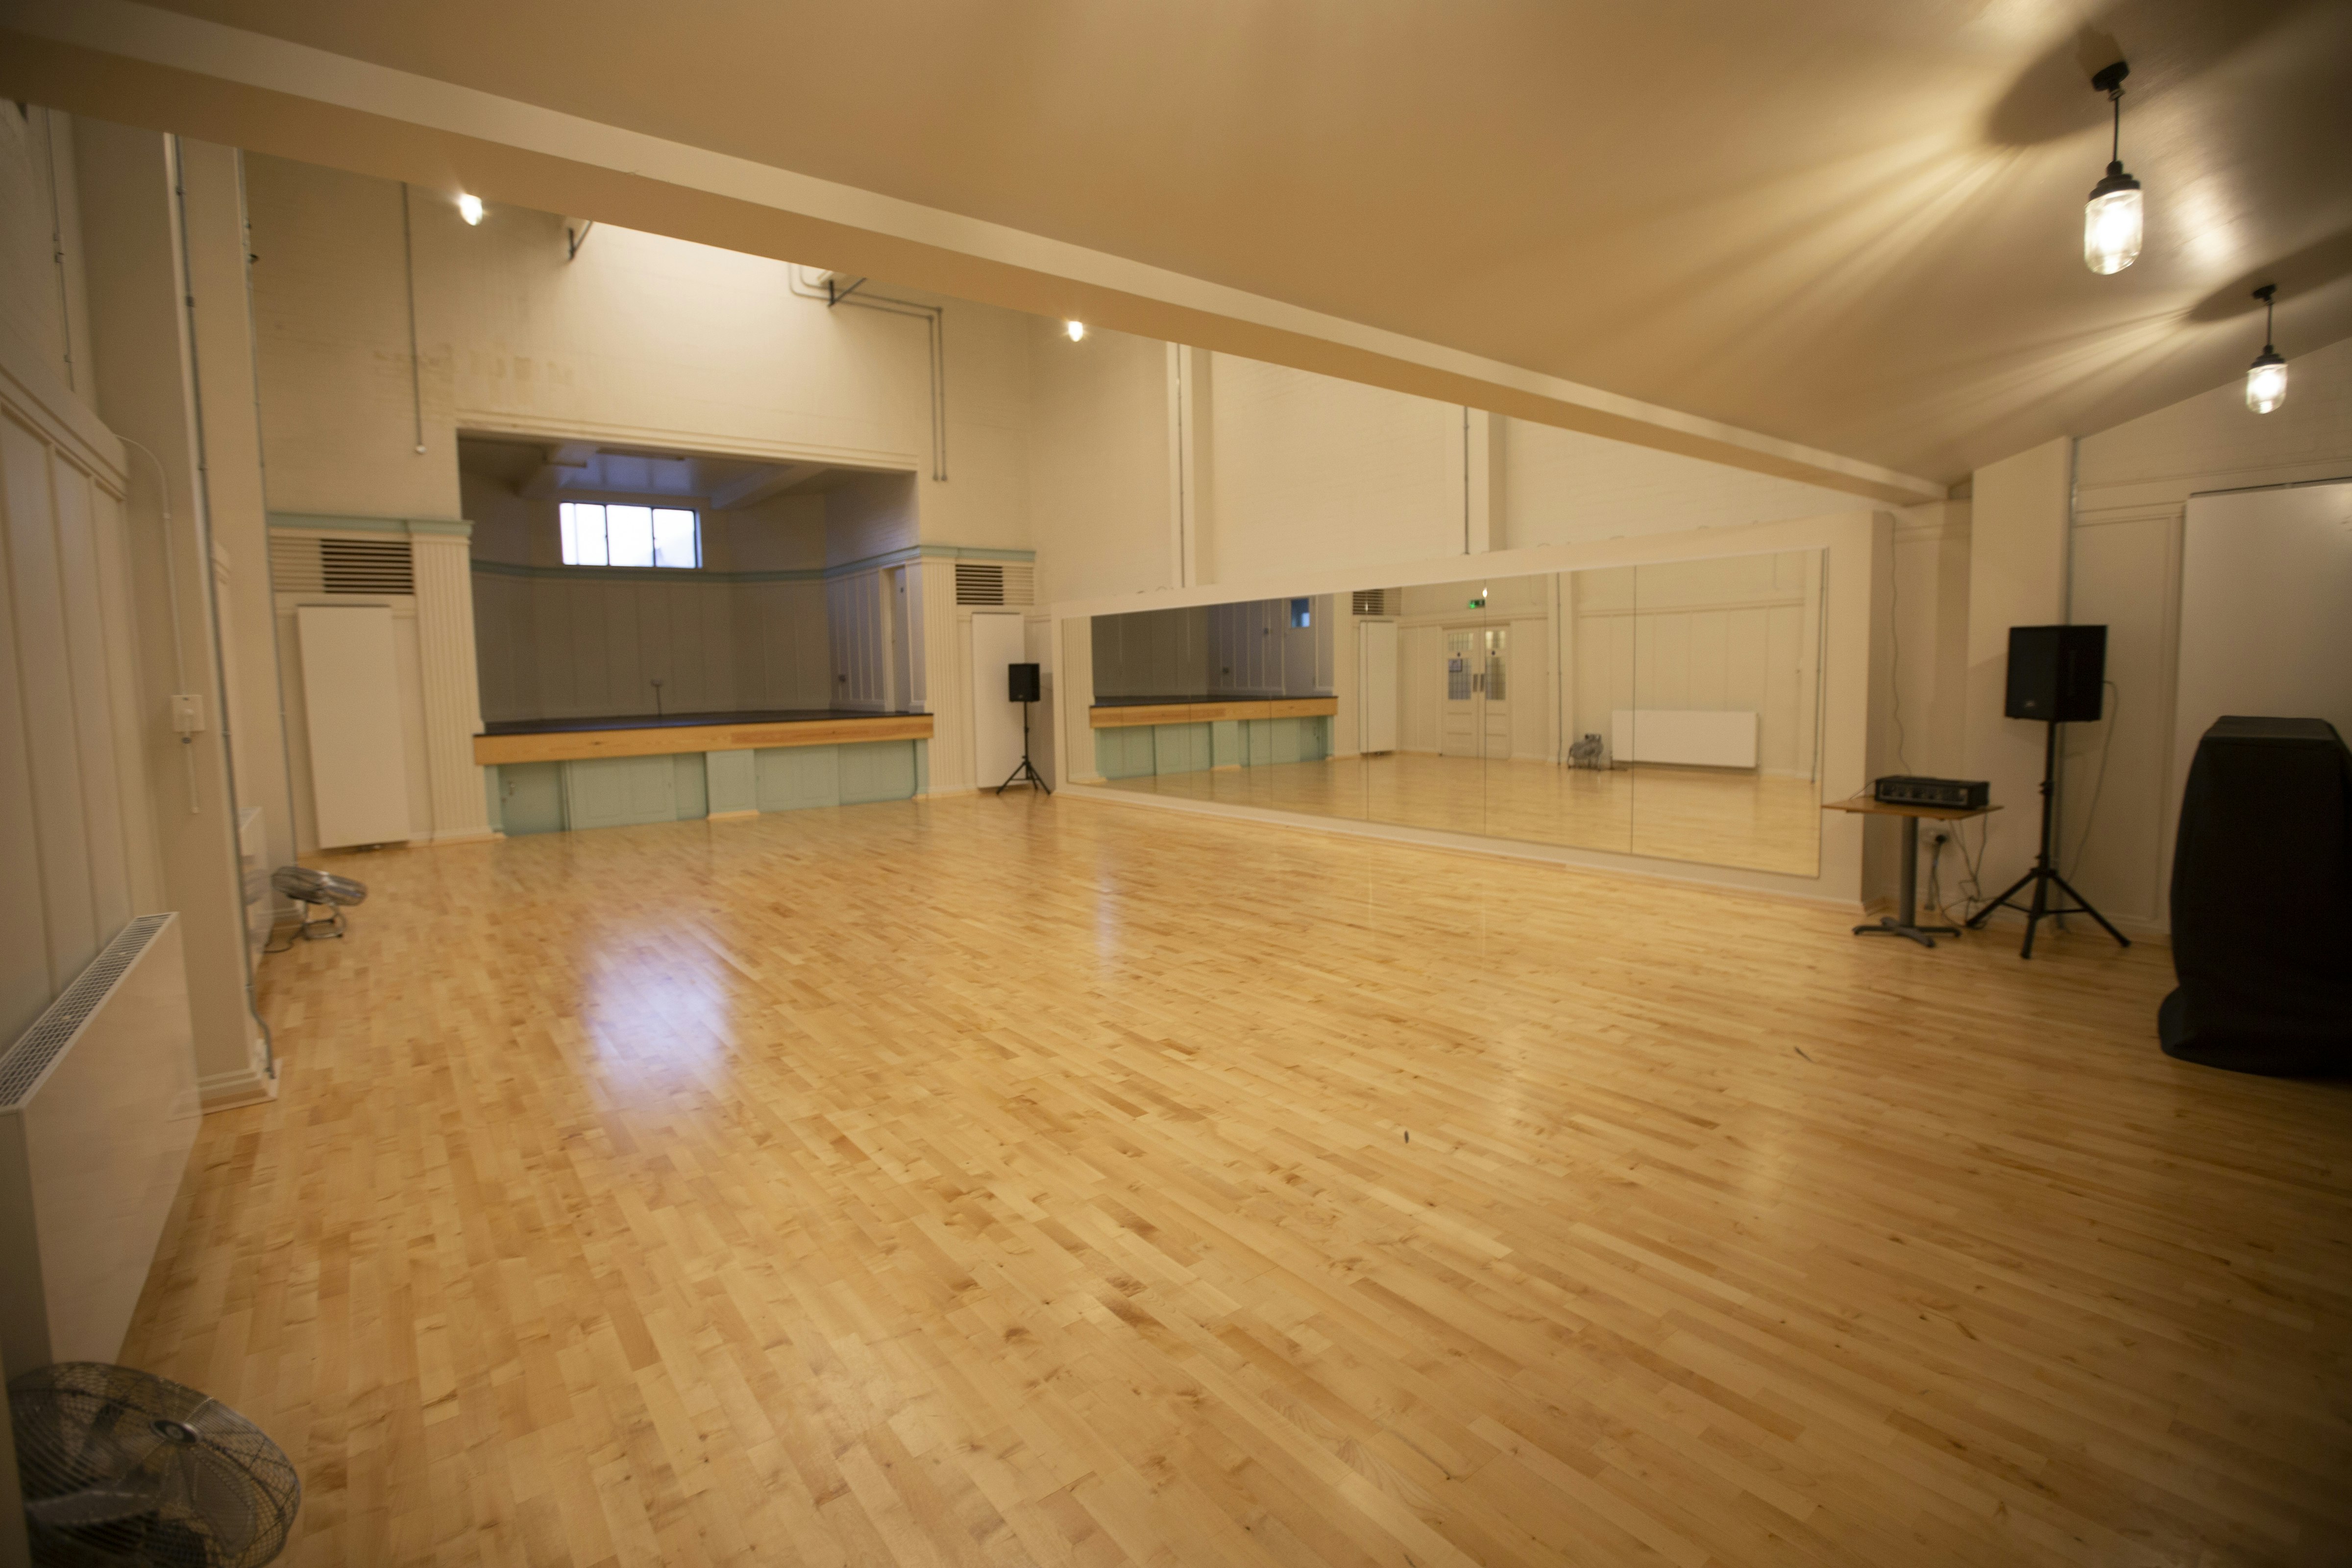 Pilates Studios Venues in London - The International College of Musical Theatre 